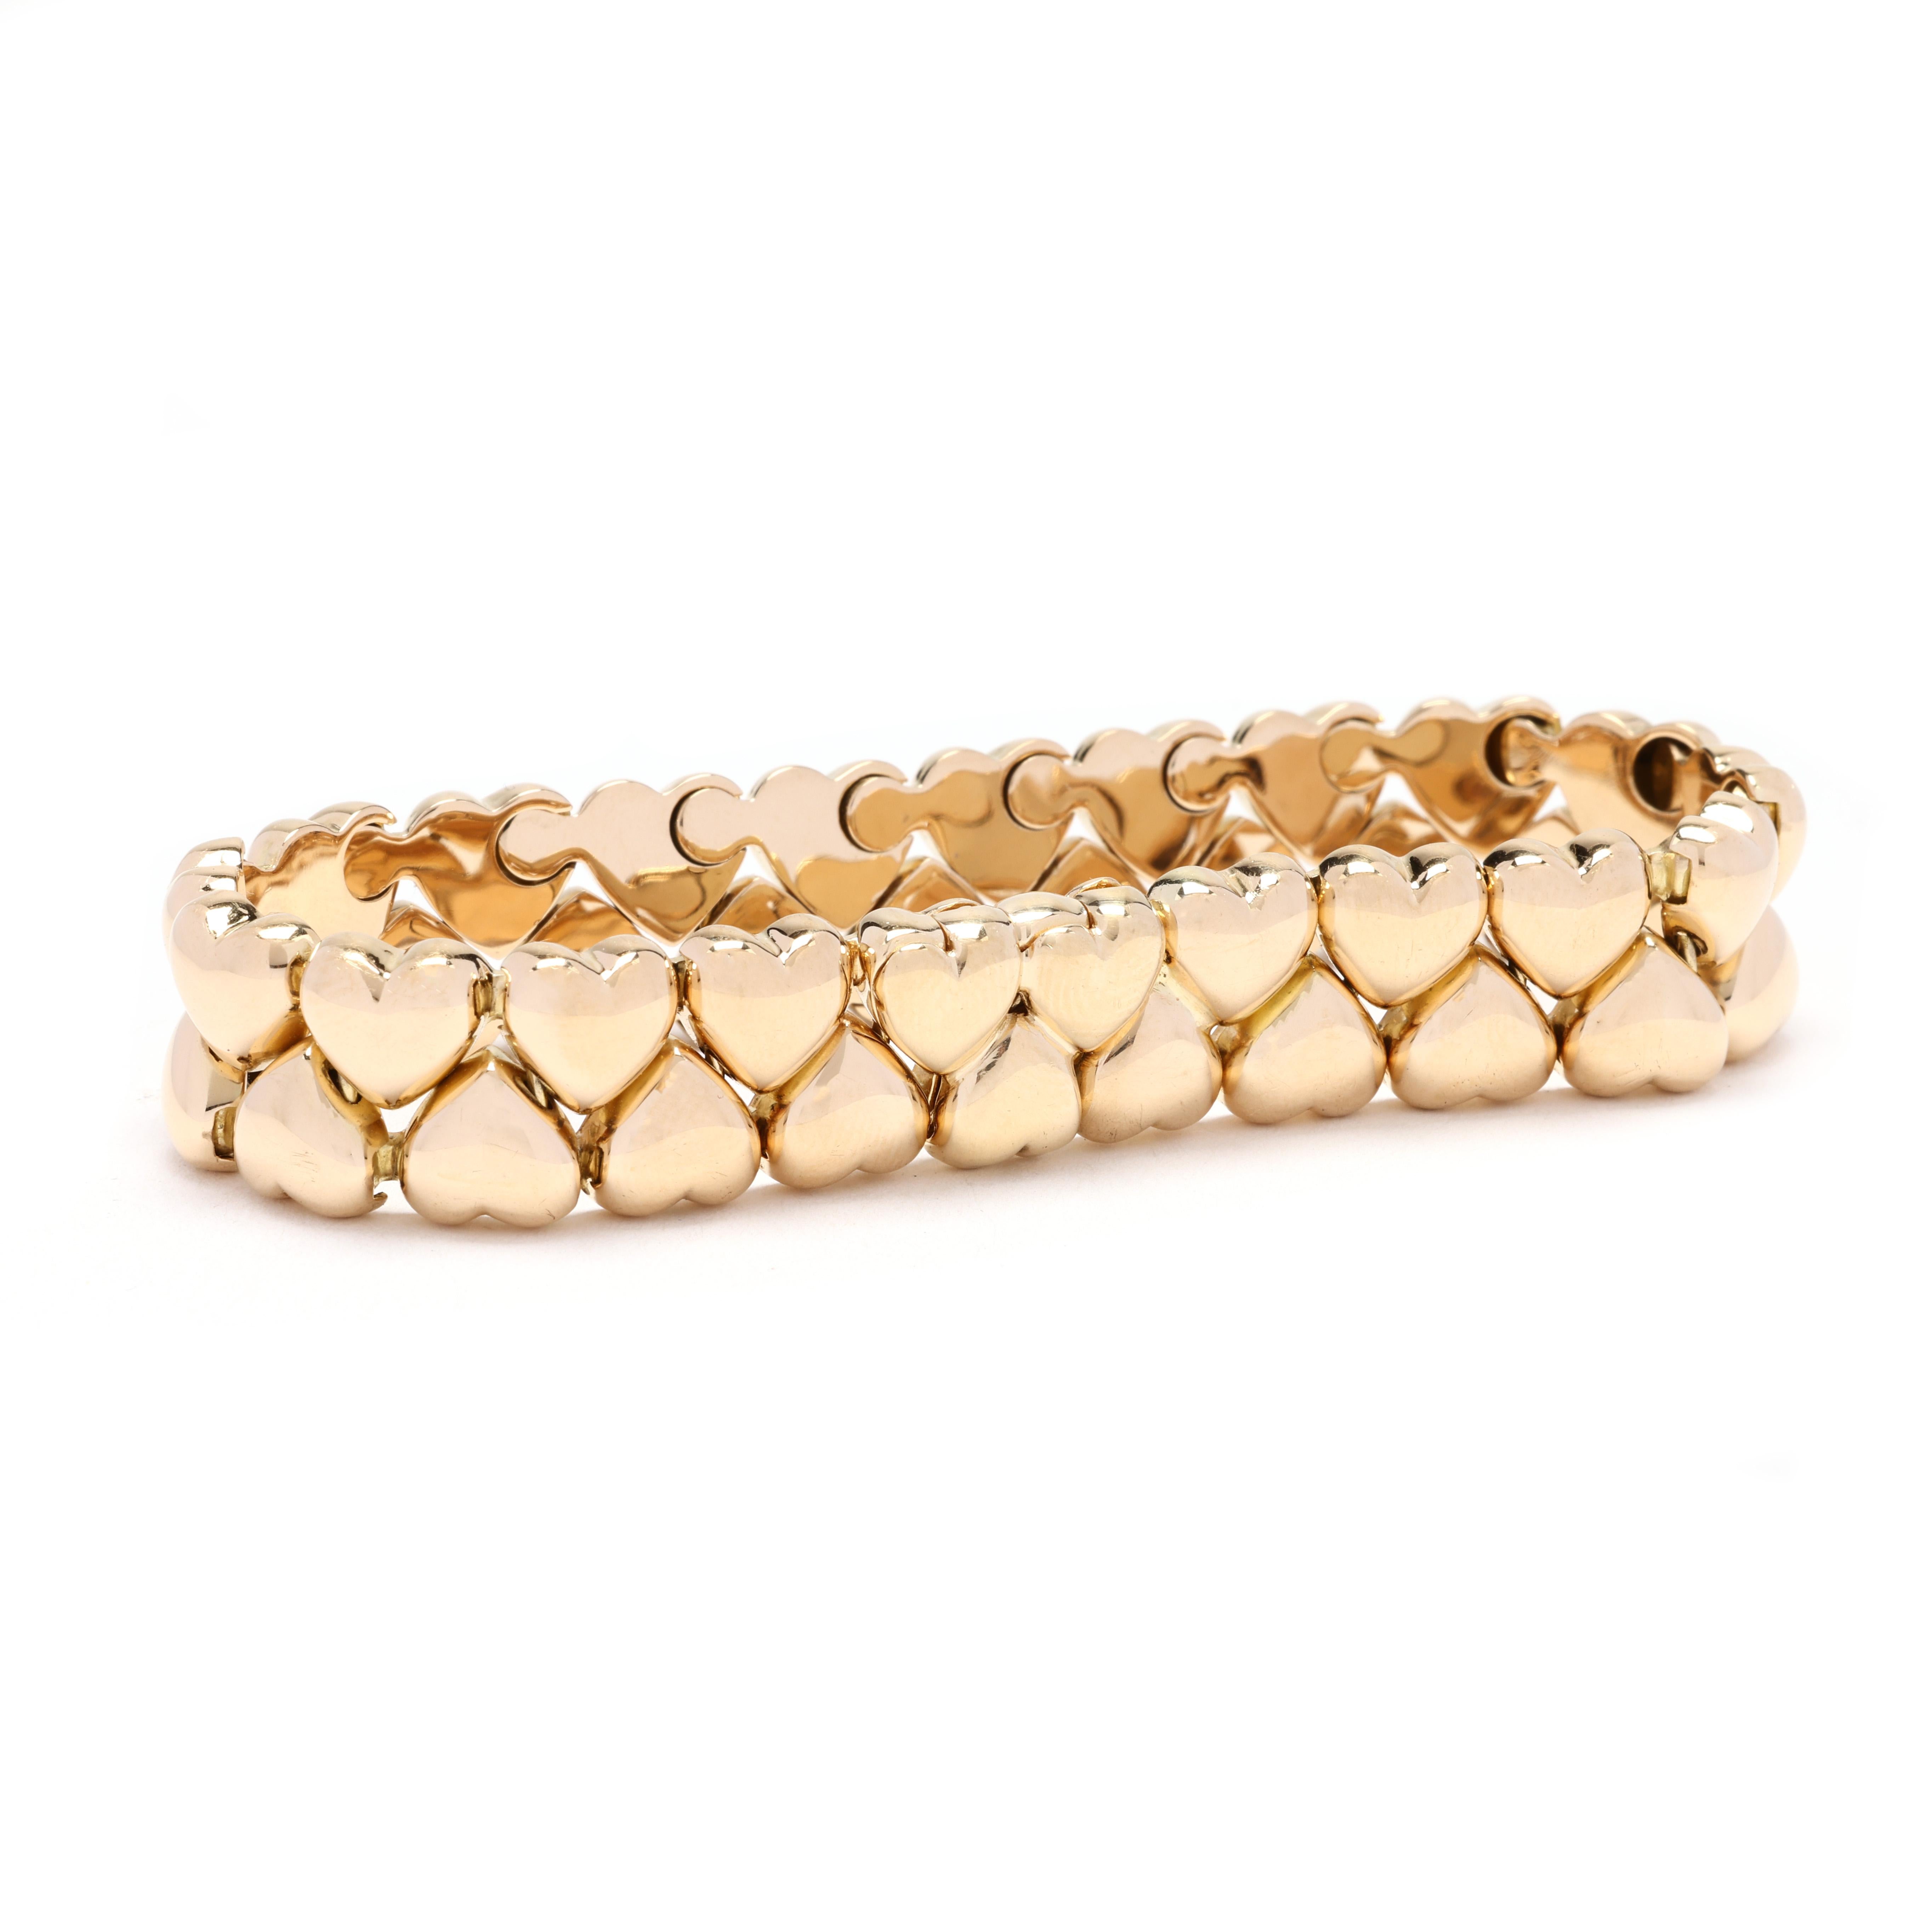 Add a touch of luxury and charm to your jewelry collection with this beautiful Cartier Heart Bracelet. Crafted from 18k yellow gold, this bracelet features multiple heart-shaped accents that are perfectly placed to create a stunning and eye-catching